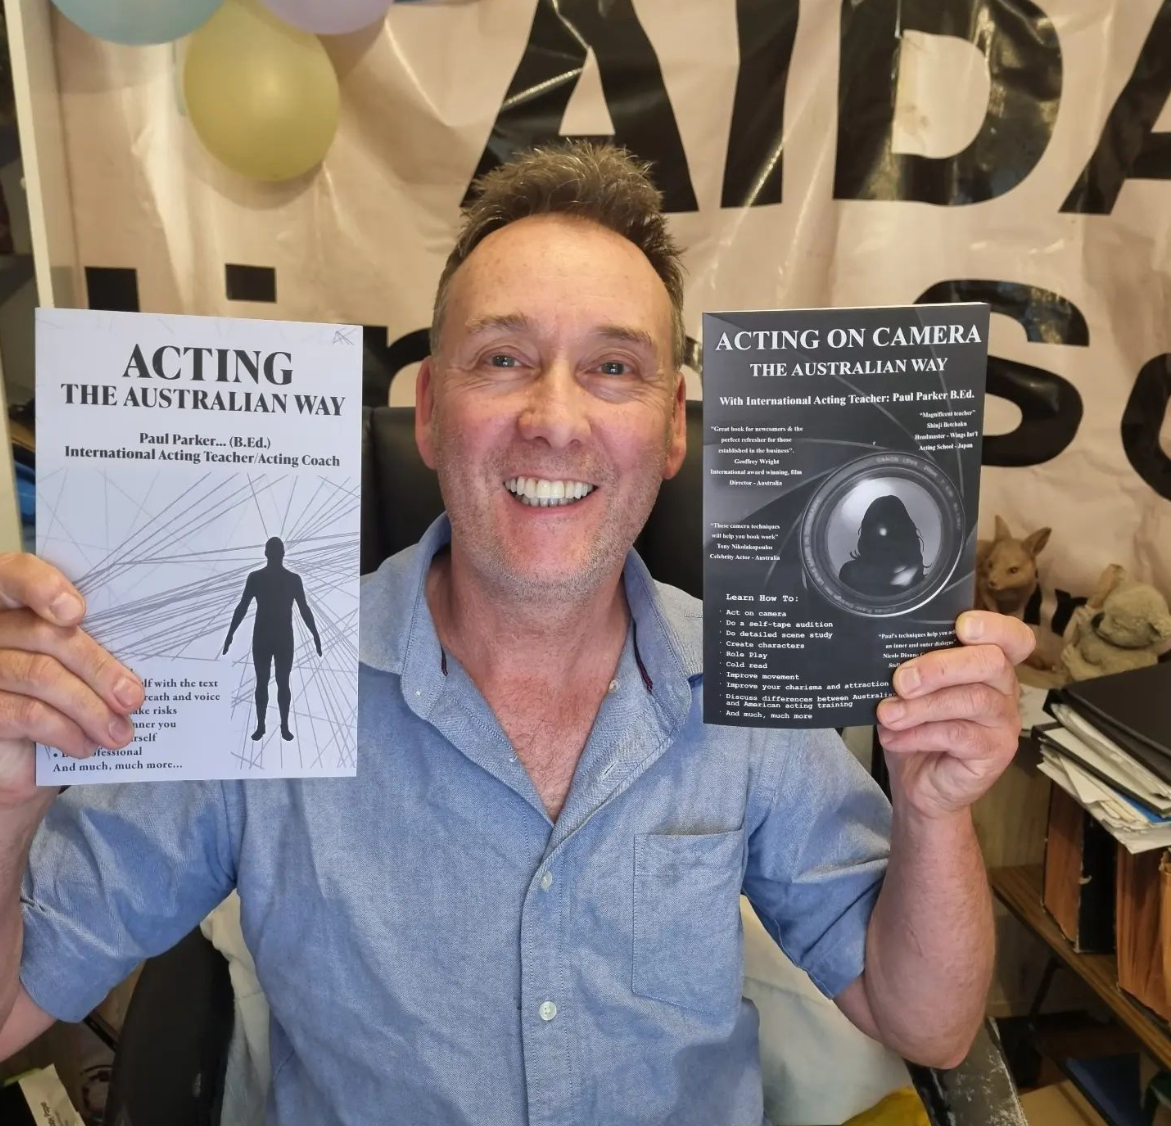 Paul Parker Author of Acting The Australian Way